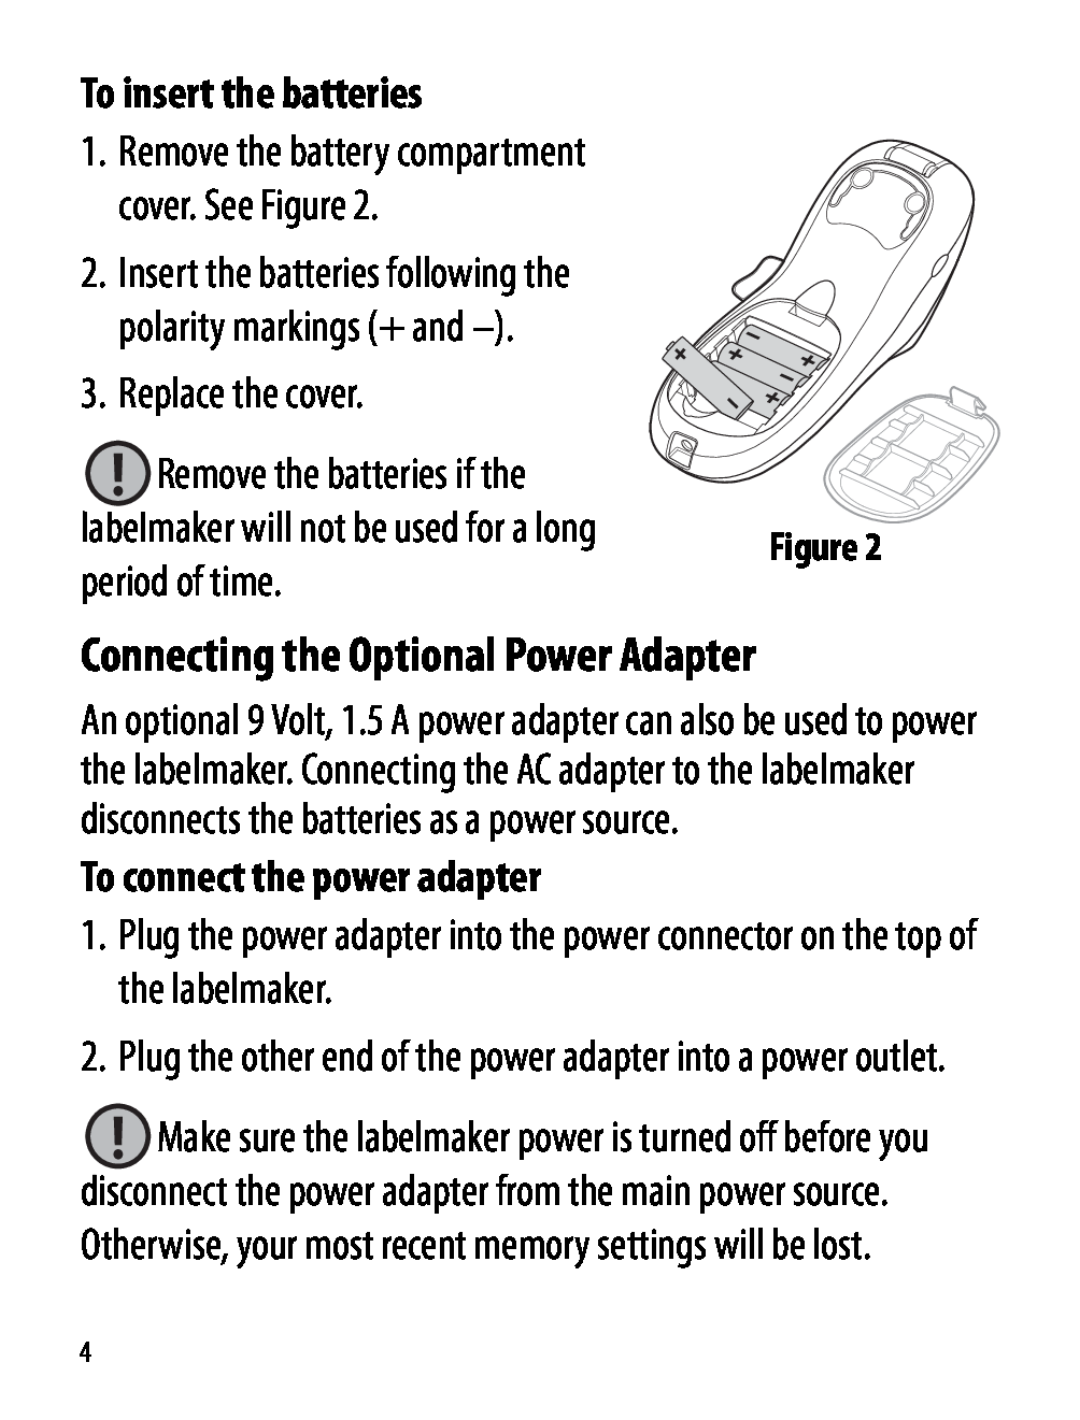 Dymo Labelmaker manual Connecting the Optional Power Adapter, To insert the batteries, period of time 